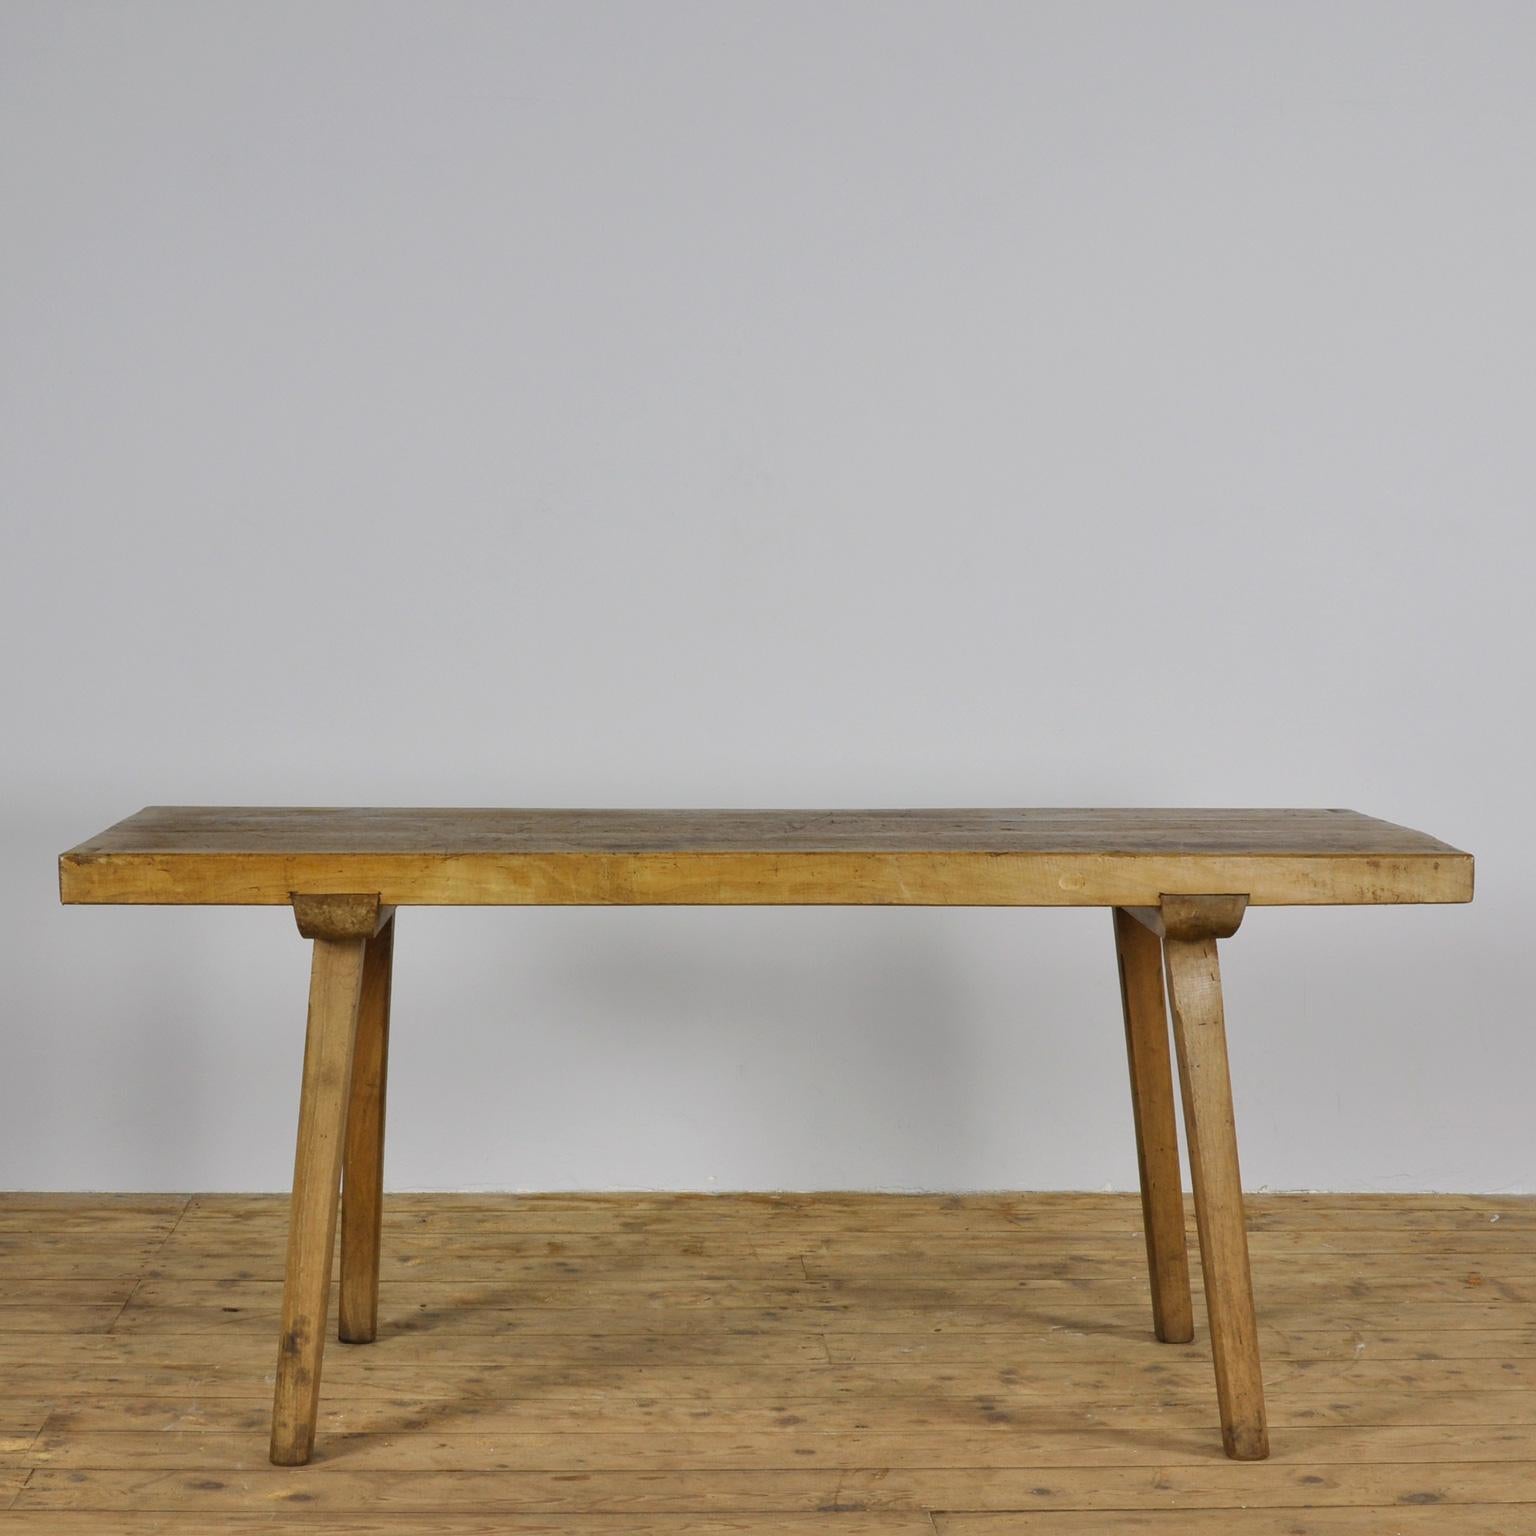 This oak butcher's farm table was produced in Hungary around the 1930s. With a nice distressed top. This piece features the original legs and has been wax-finished.